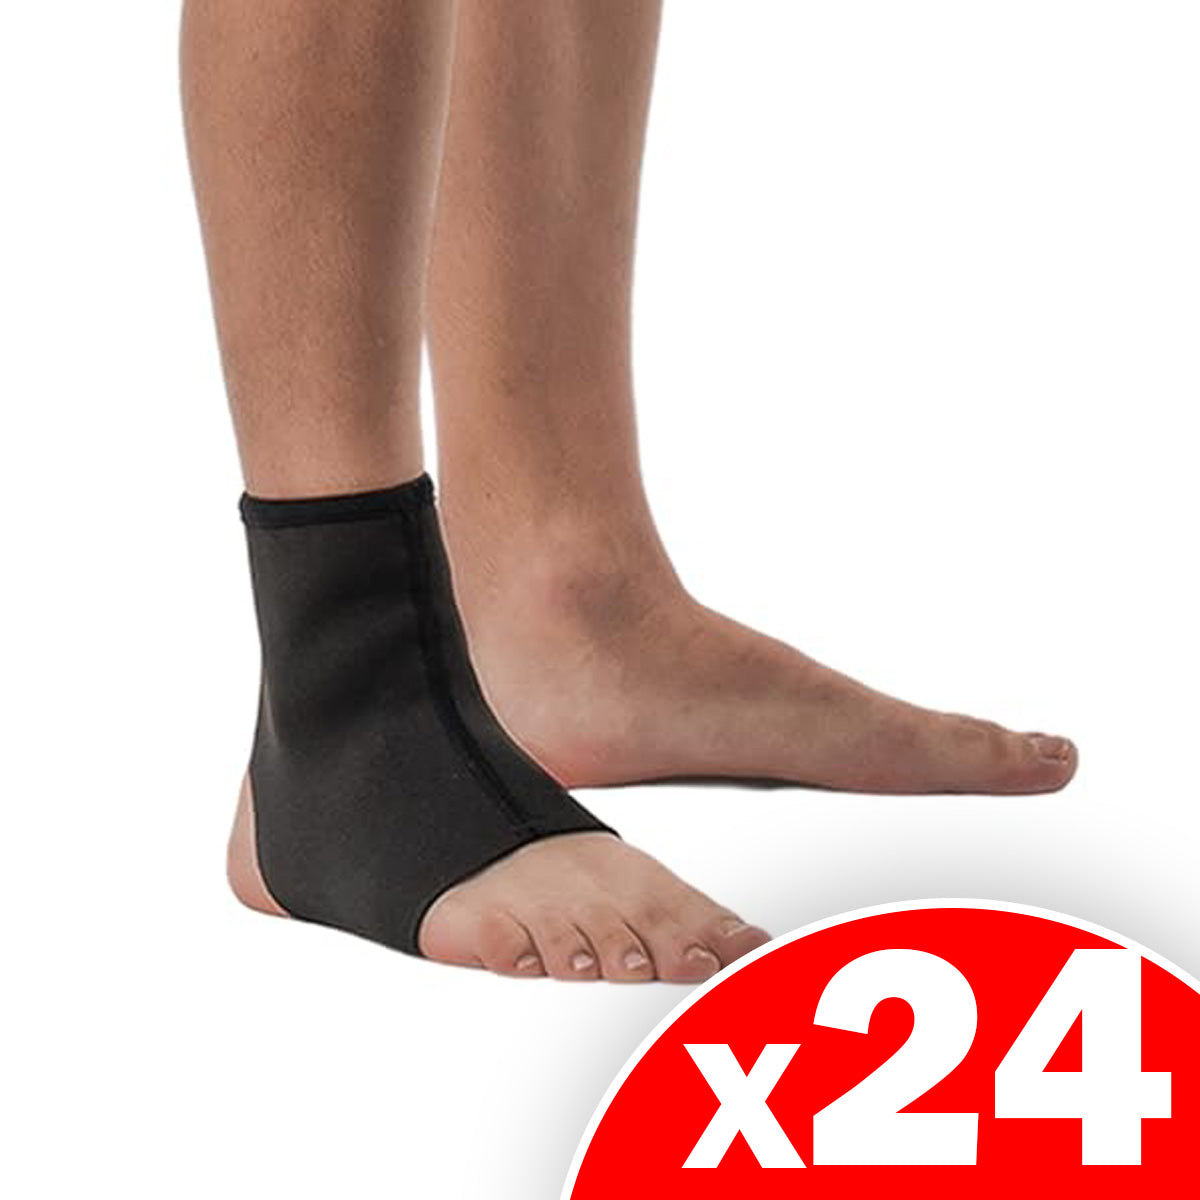 Copper Care Copper Compression Brace For Ankle One Size Fits Most, 24 Pack